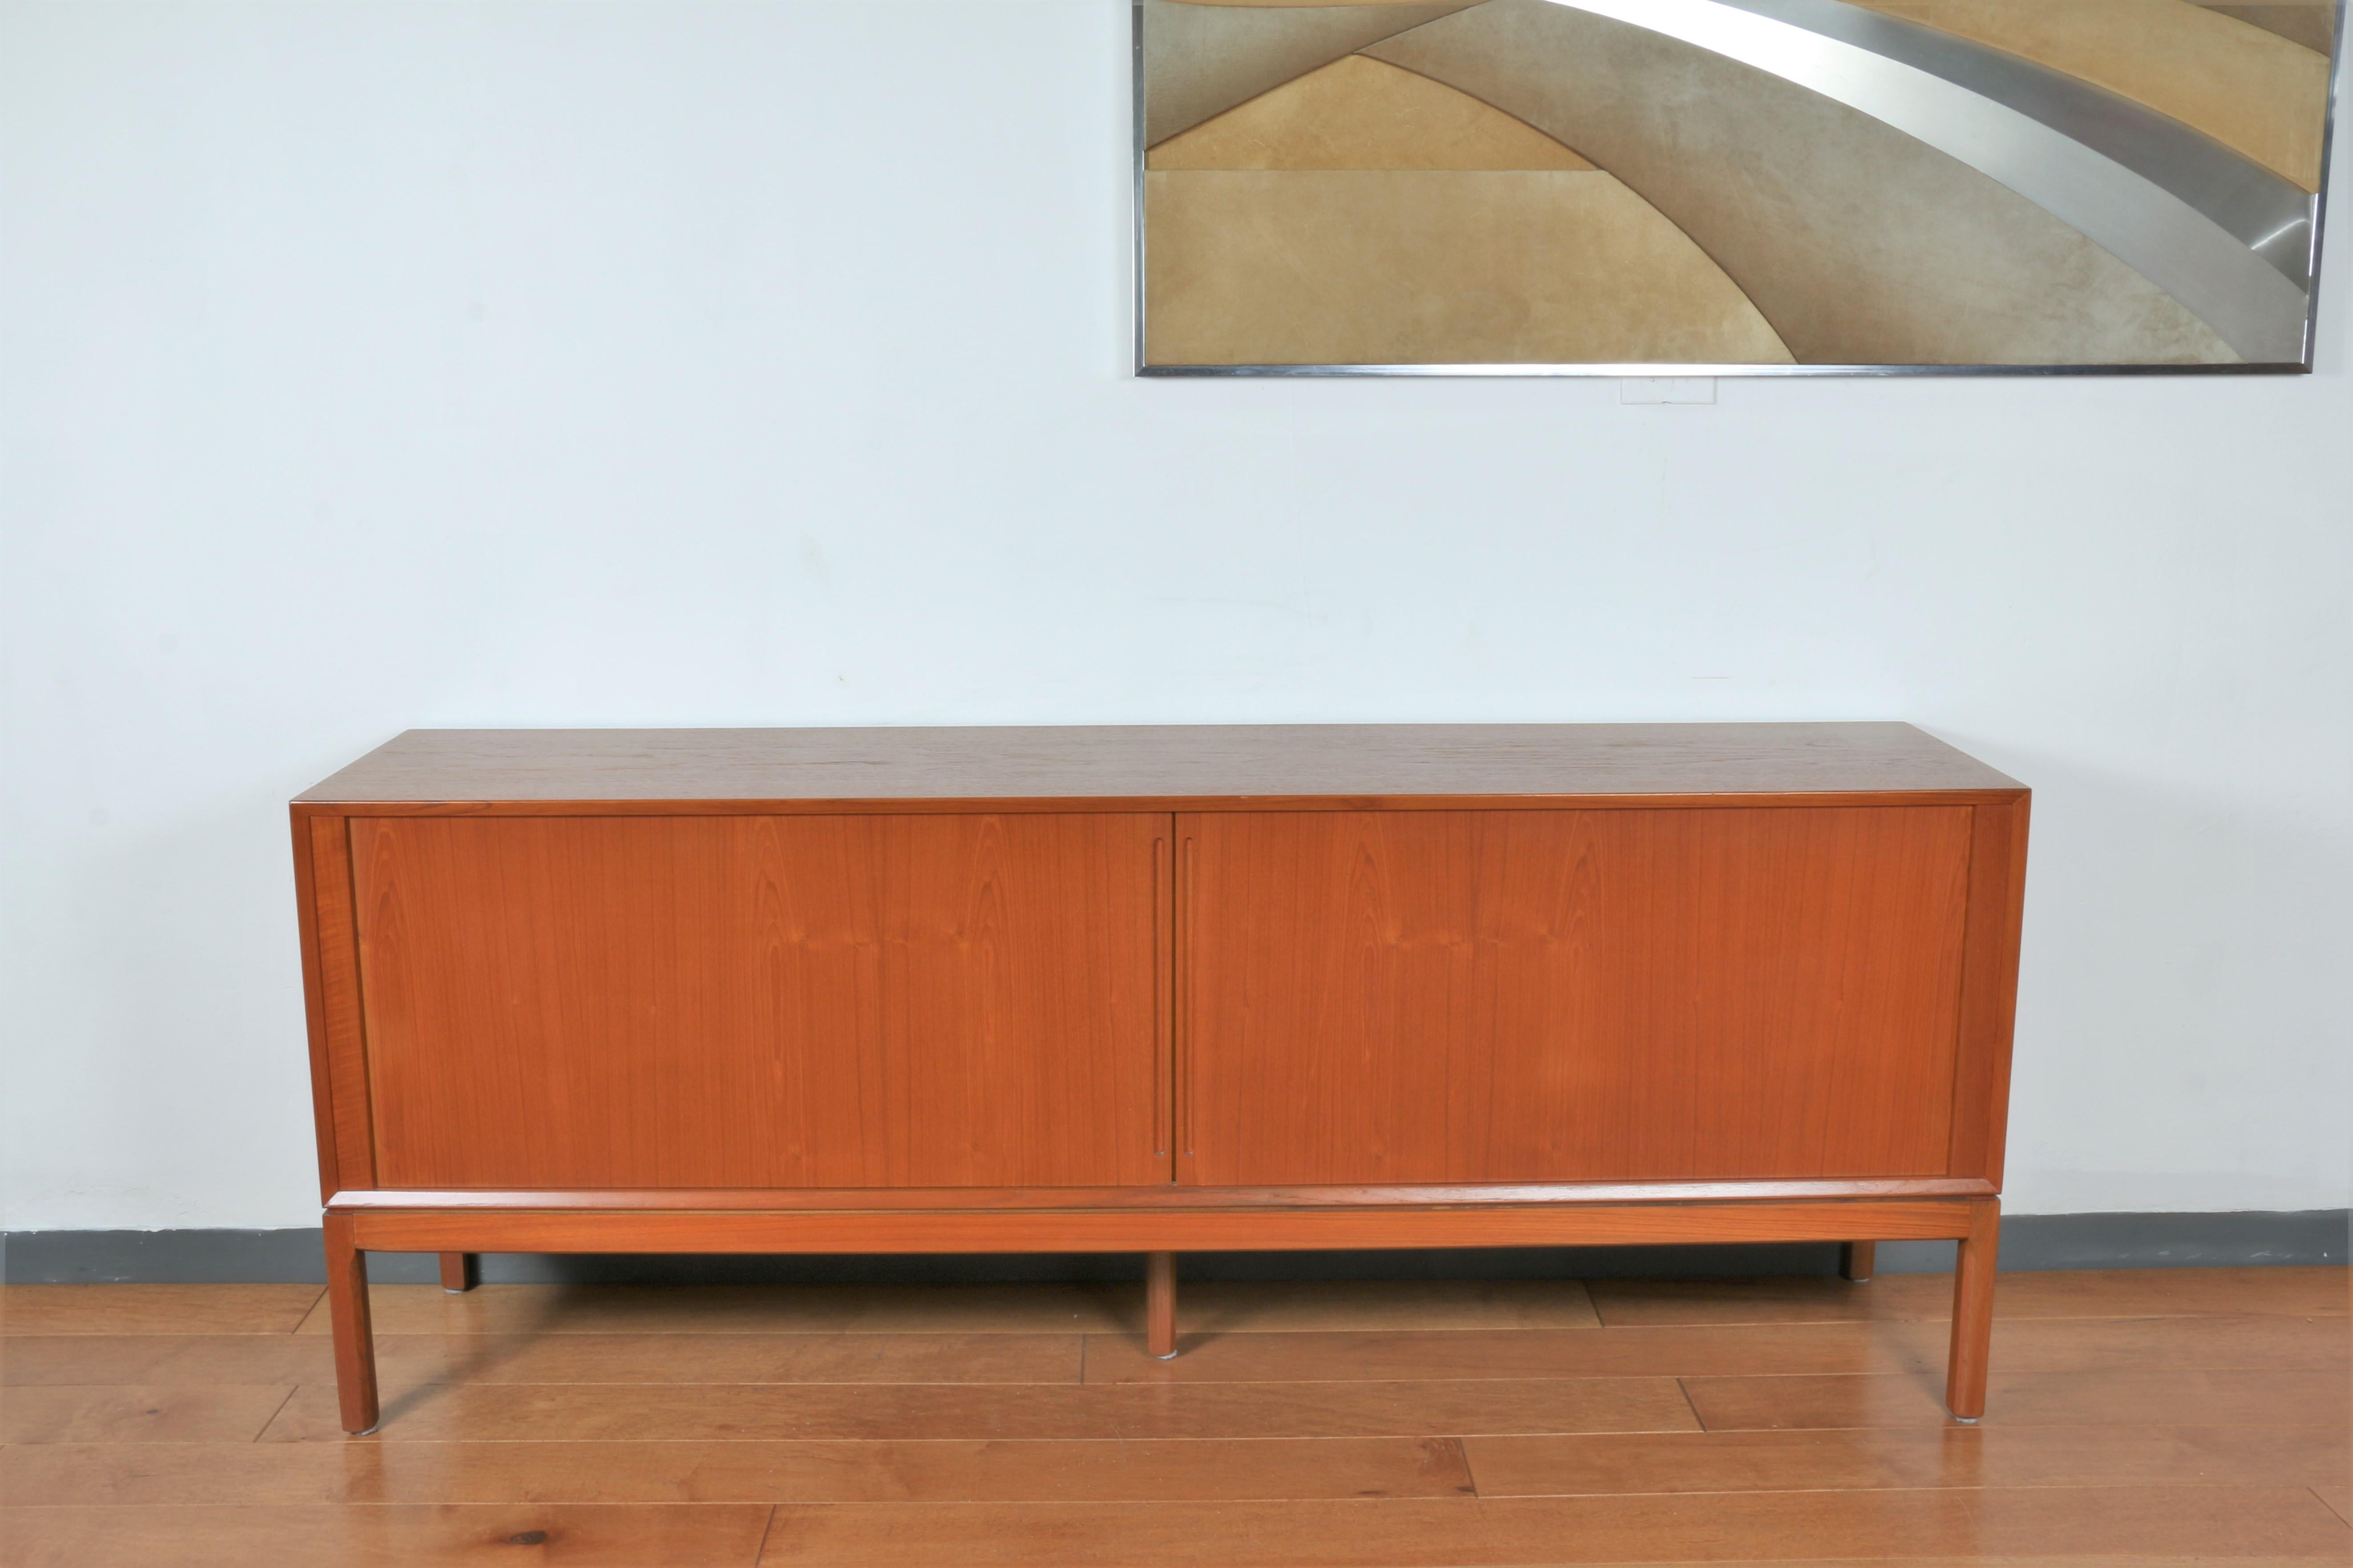 Danish modern teak credenza with tambour sideboard doors. The credenza is made with two sliding sideboards and two opening drawers on one side. This was made in 1960's and 
 is refurnished.